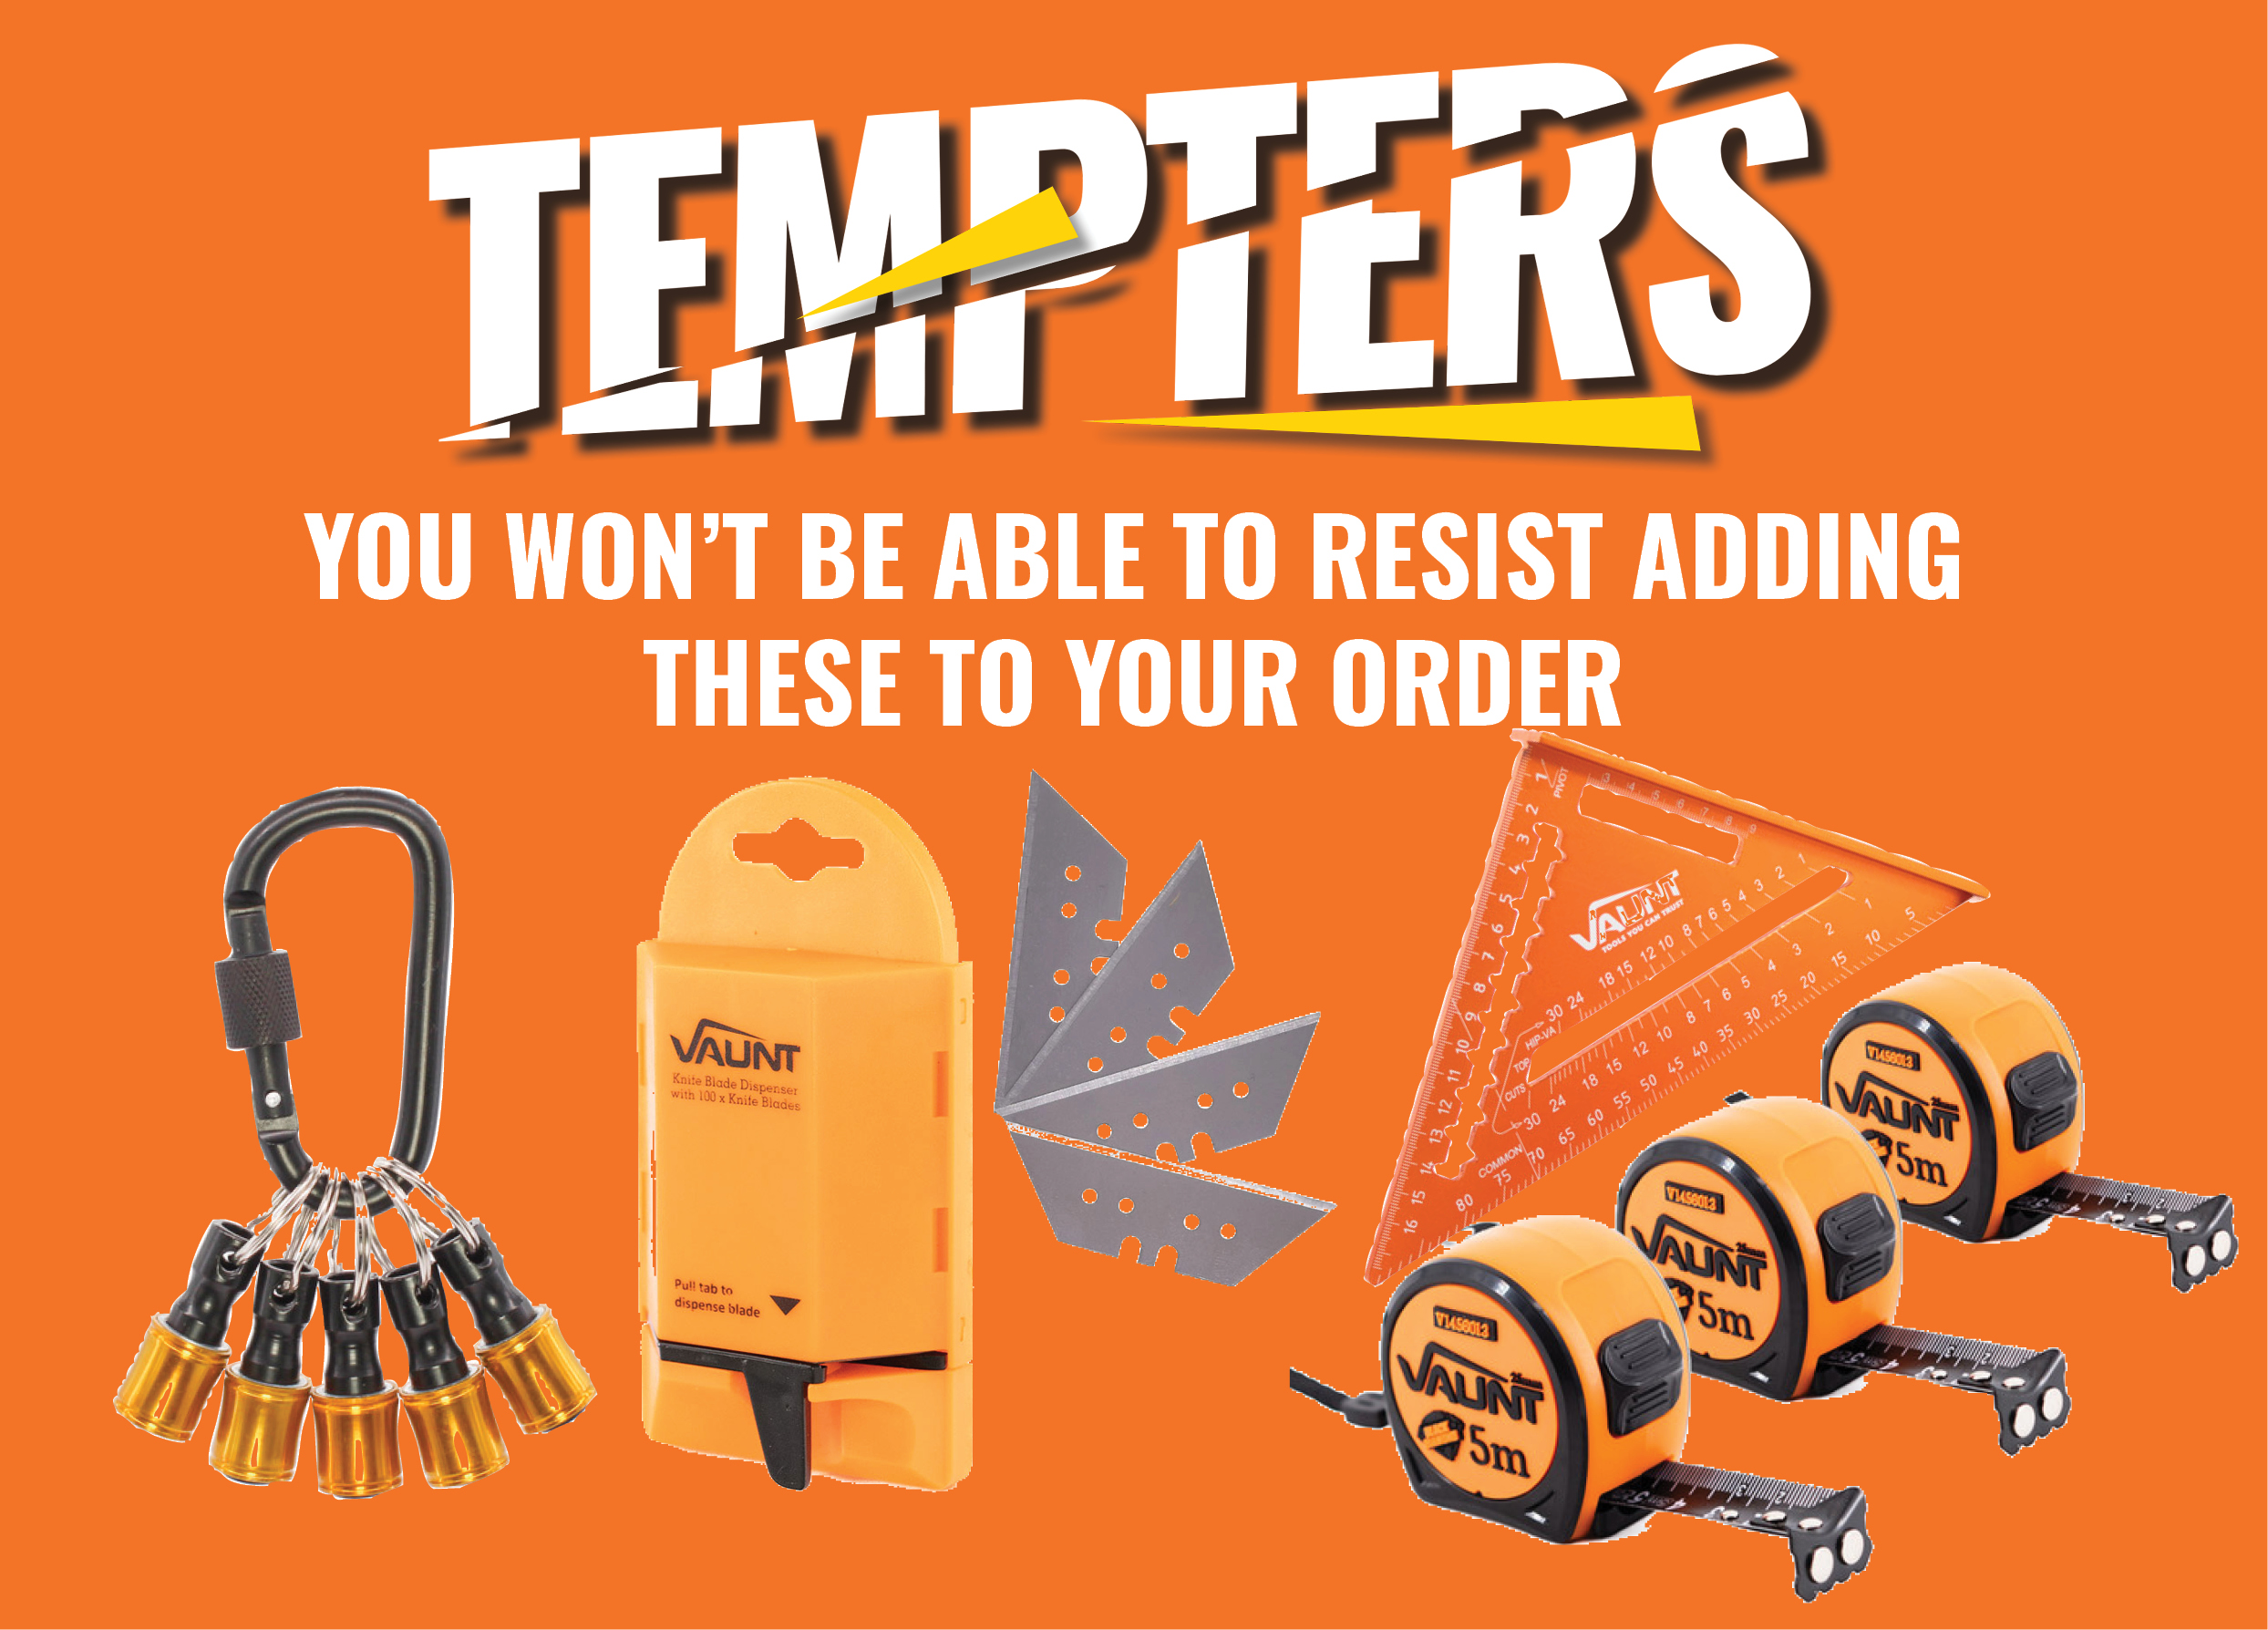 Image that contains some vaunt brand tempters deals